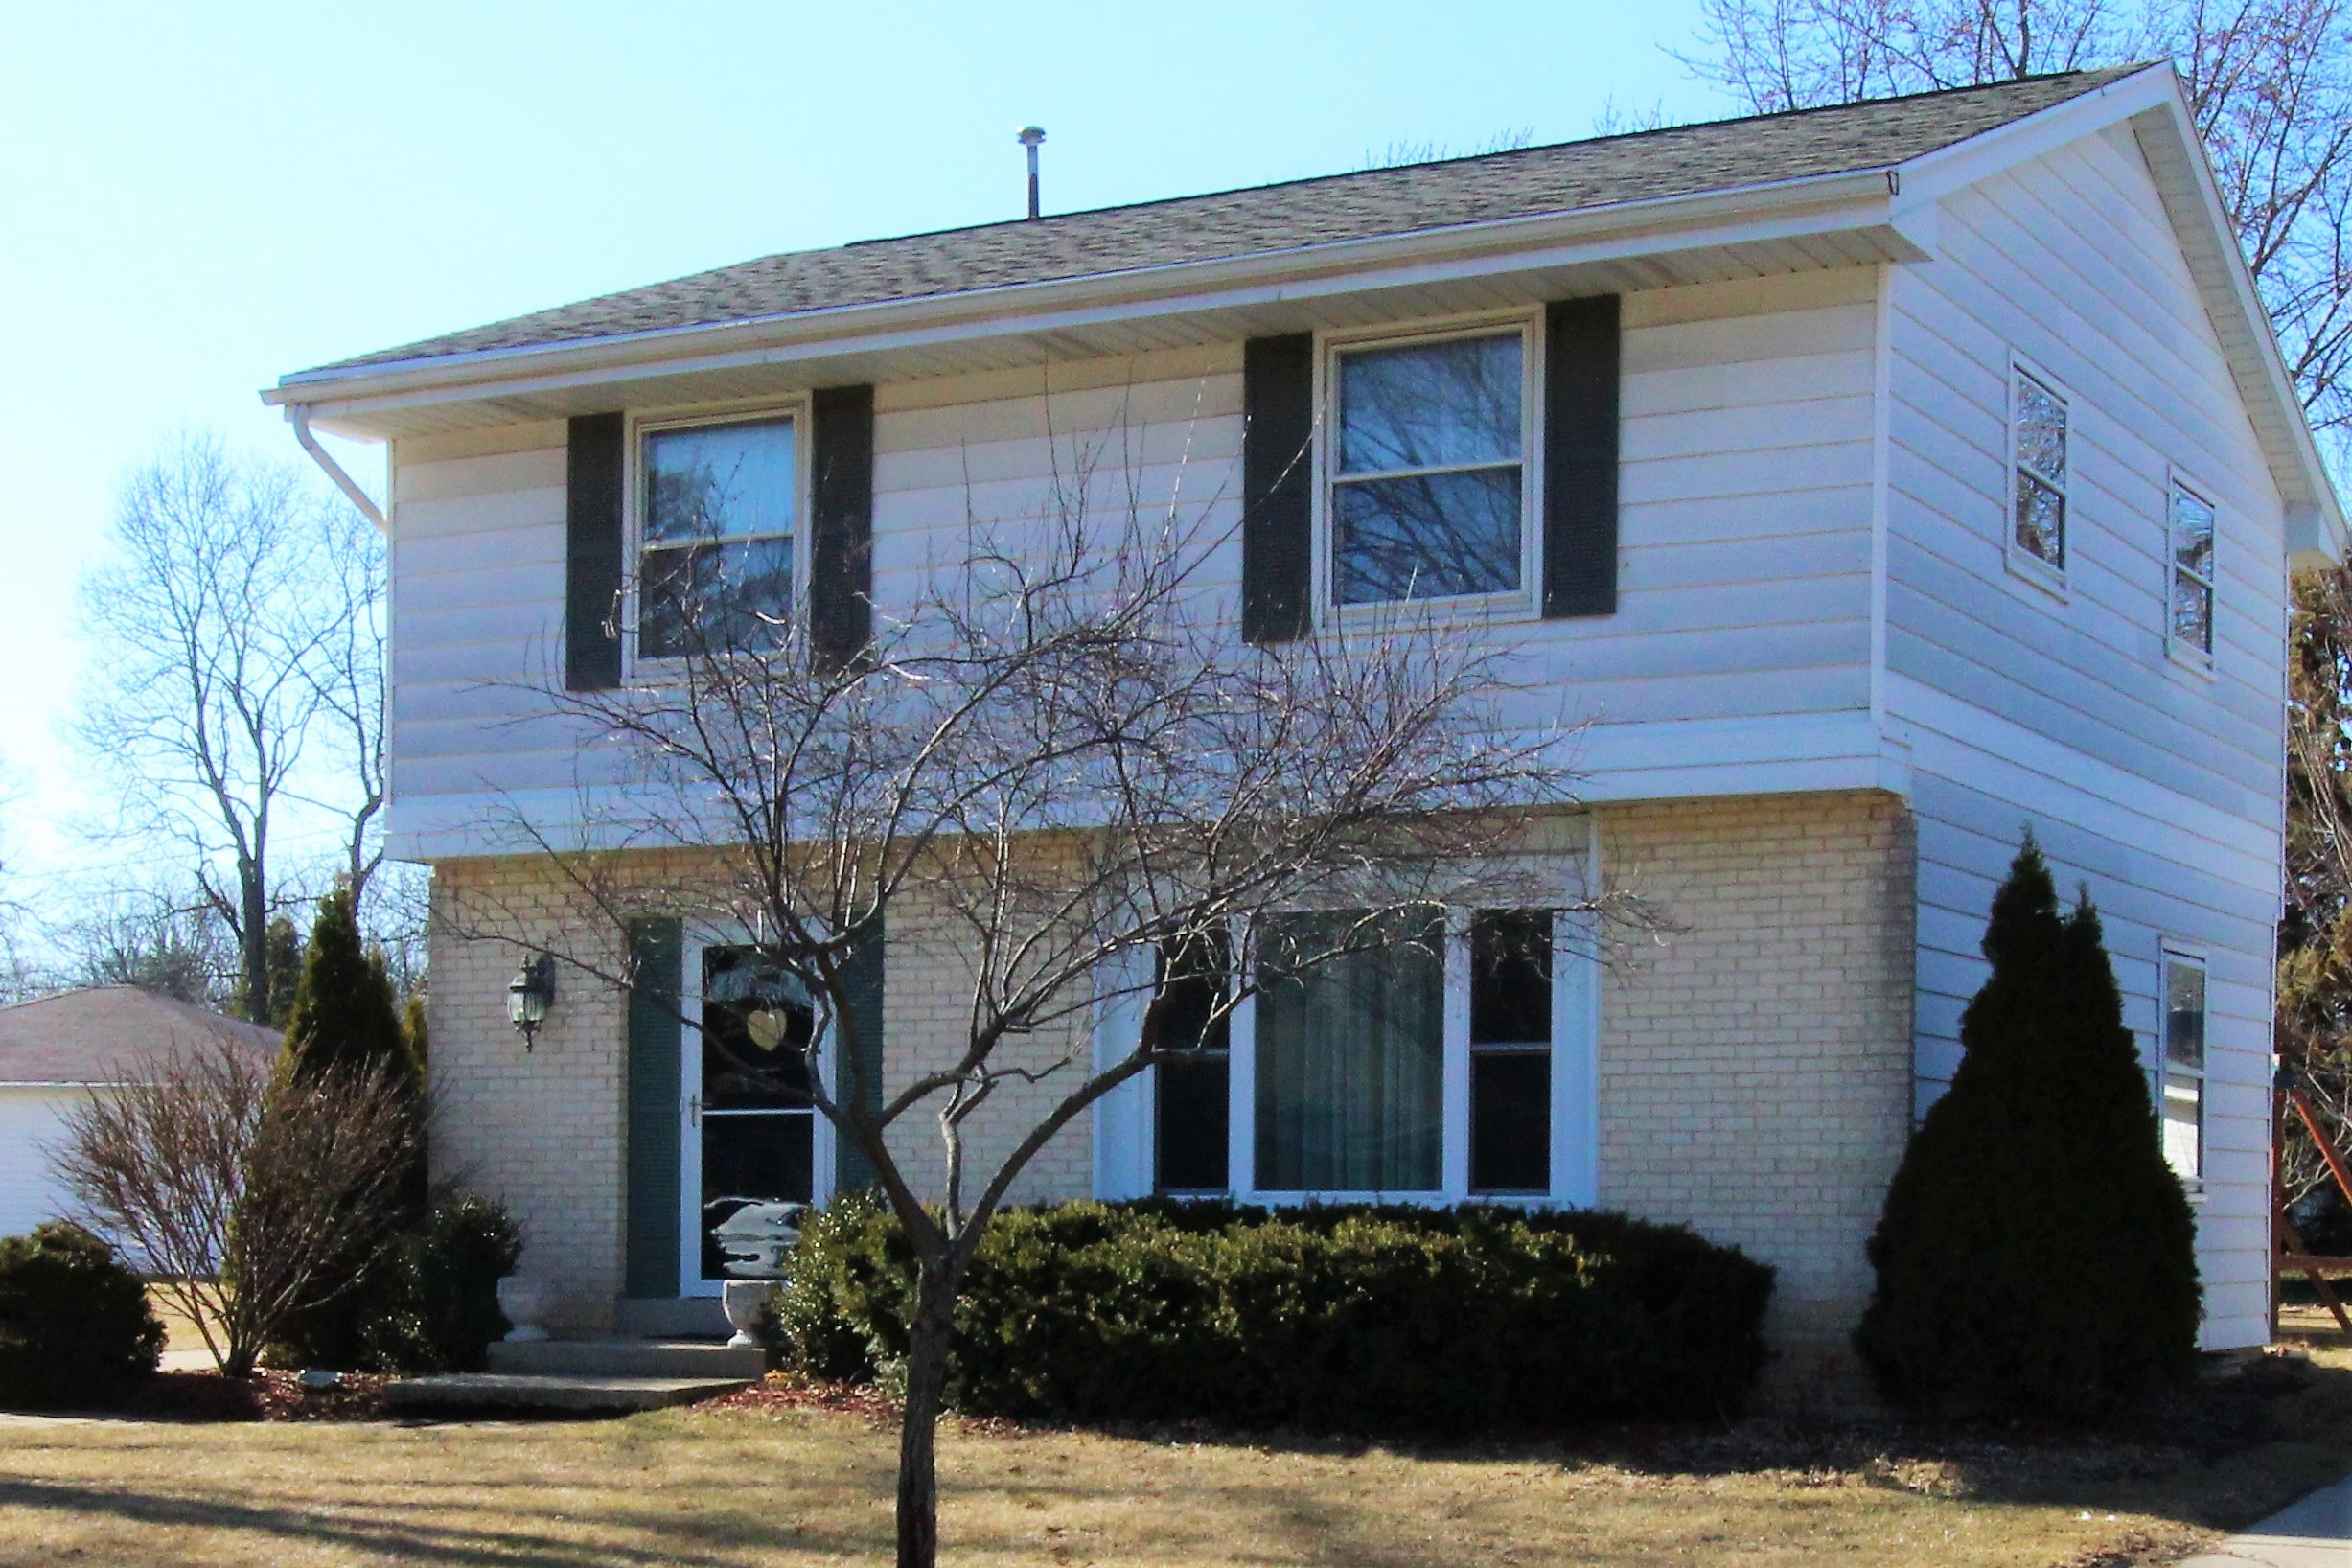 BEAUTIFULLY UPDATED 3 BEDROOM, 1.5 BATH COLONIAL WITH 2.75 CAR GARAGE FOR ONLY $219,900!!!  SOLD!!!